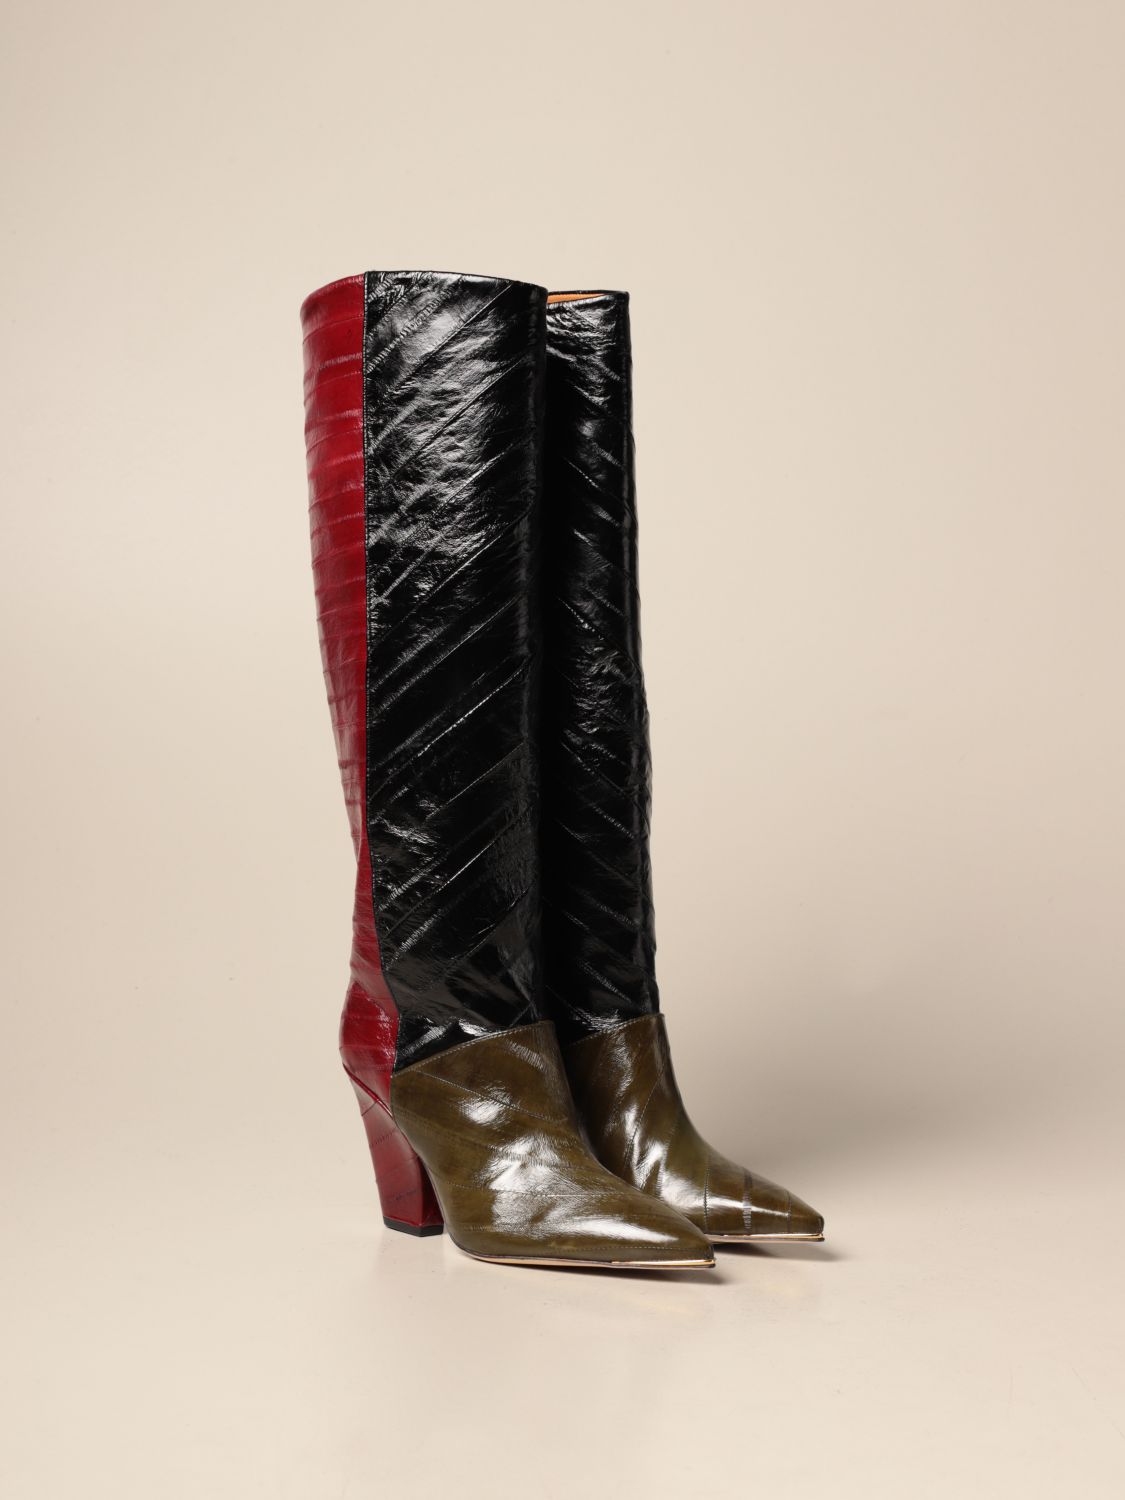 Tory Burch Outlet: Lila boots in eel skin - Multicolor | Tory Burch heeled  booties 76546 online on 